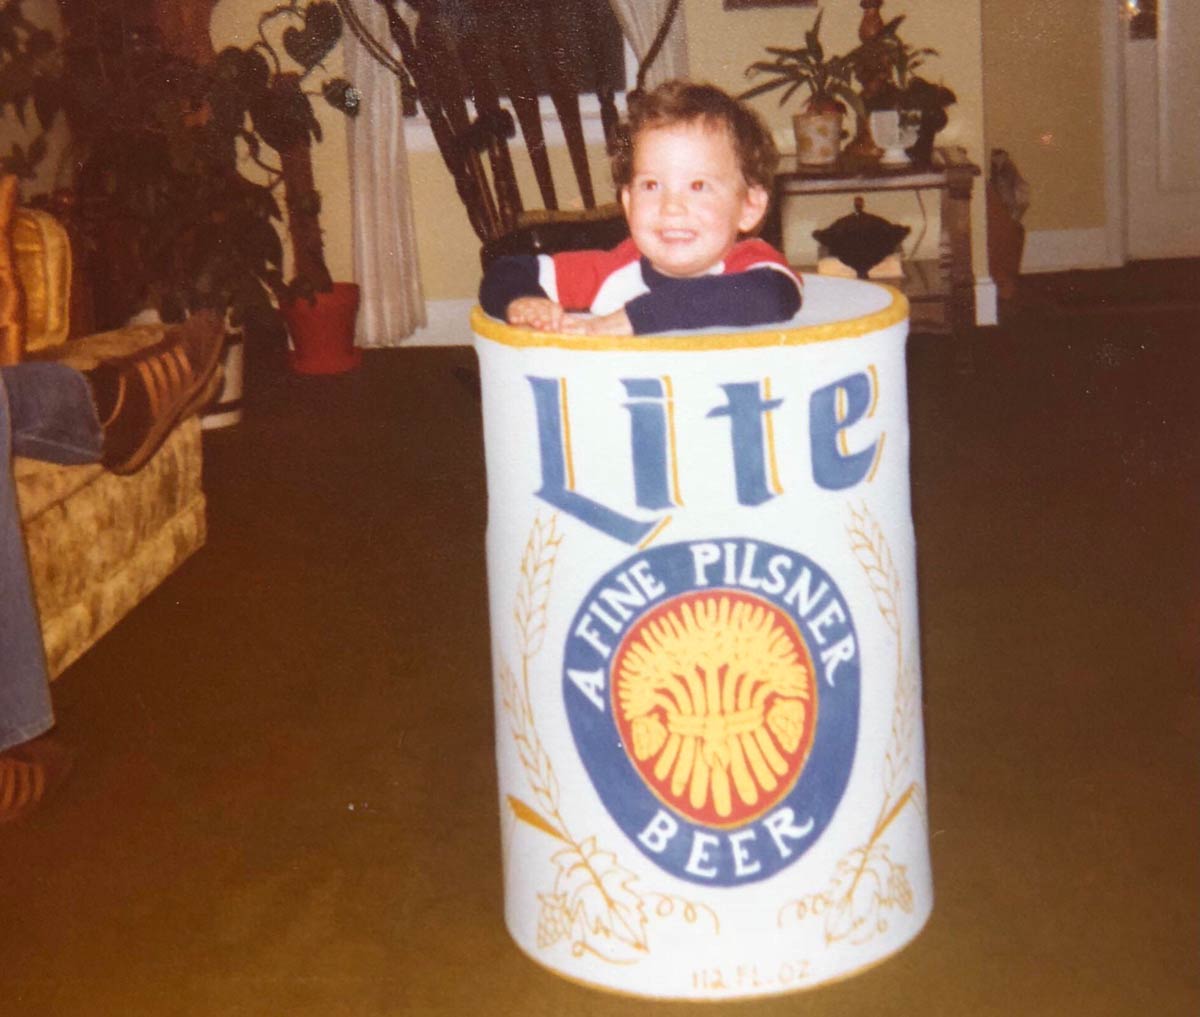 Going as a beer for Halloween - 1981